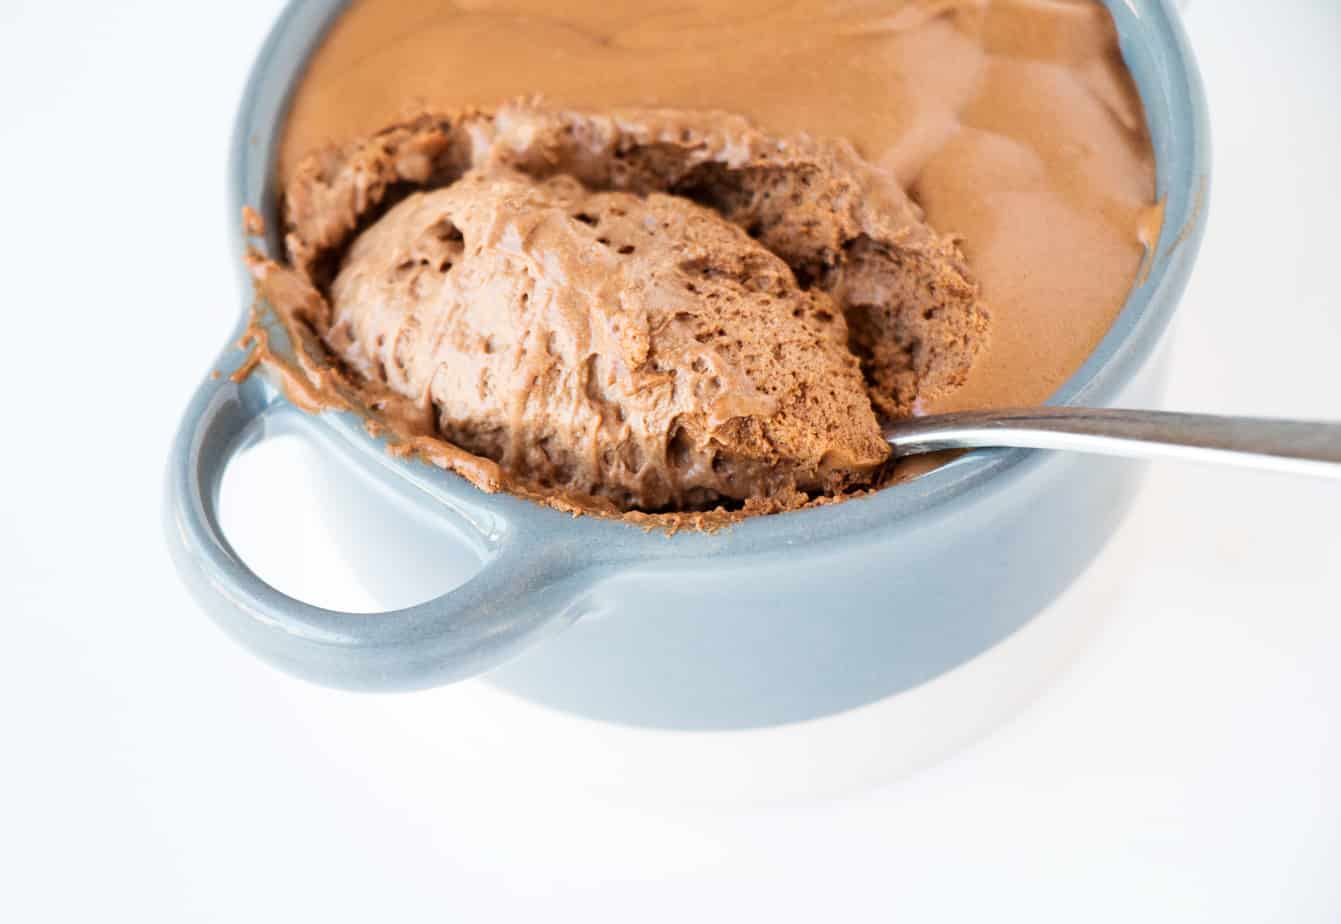 Creamy chocolate mousse. Low Carb High Fat